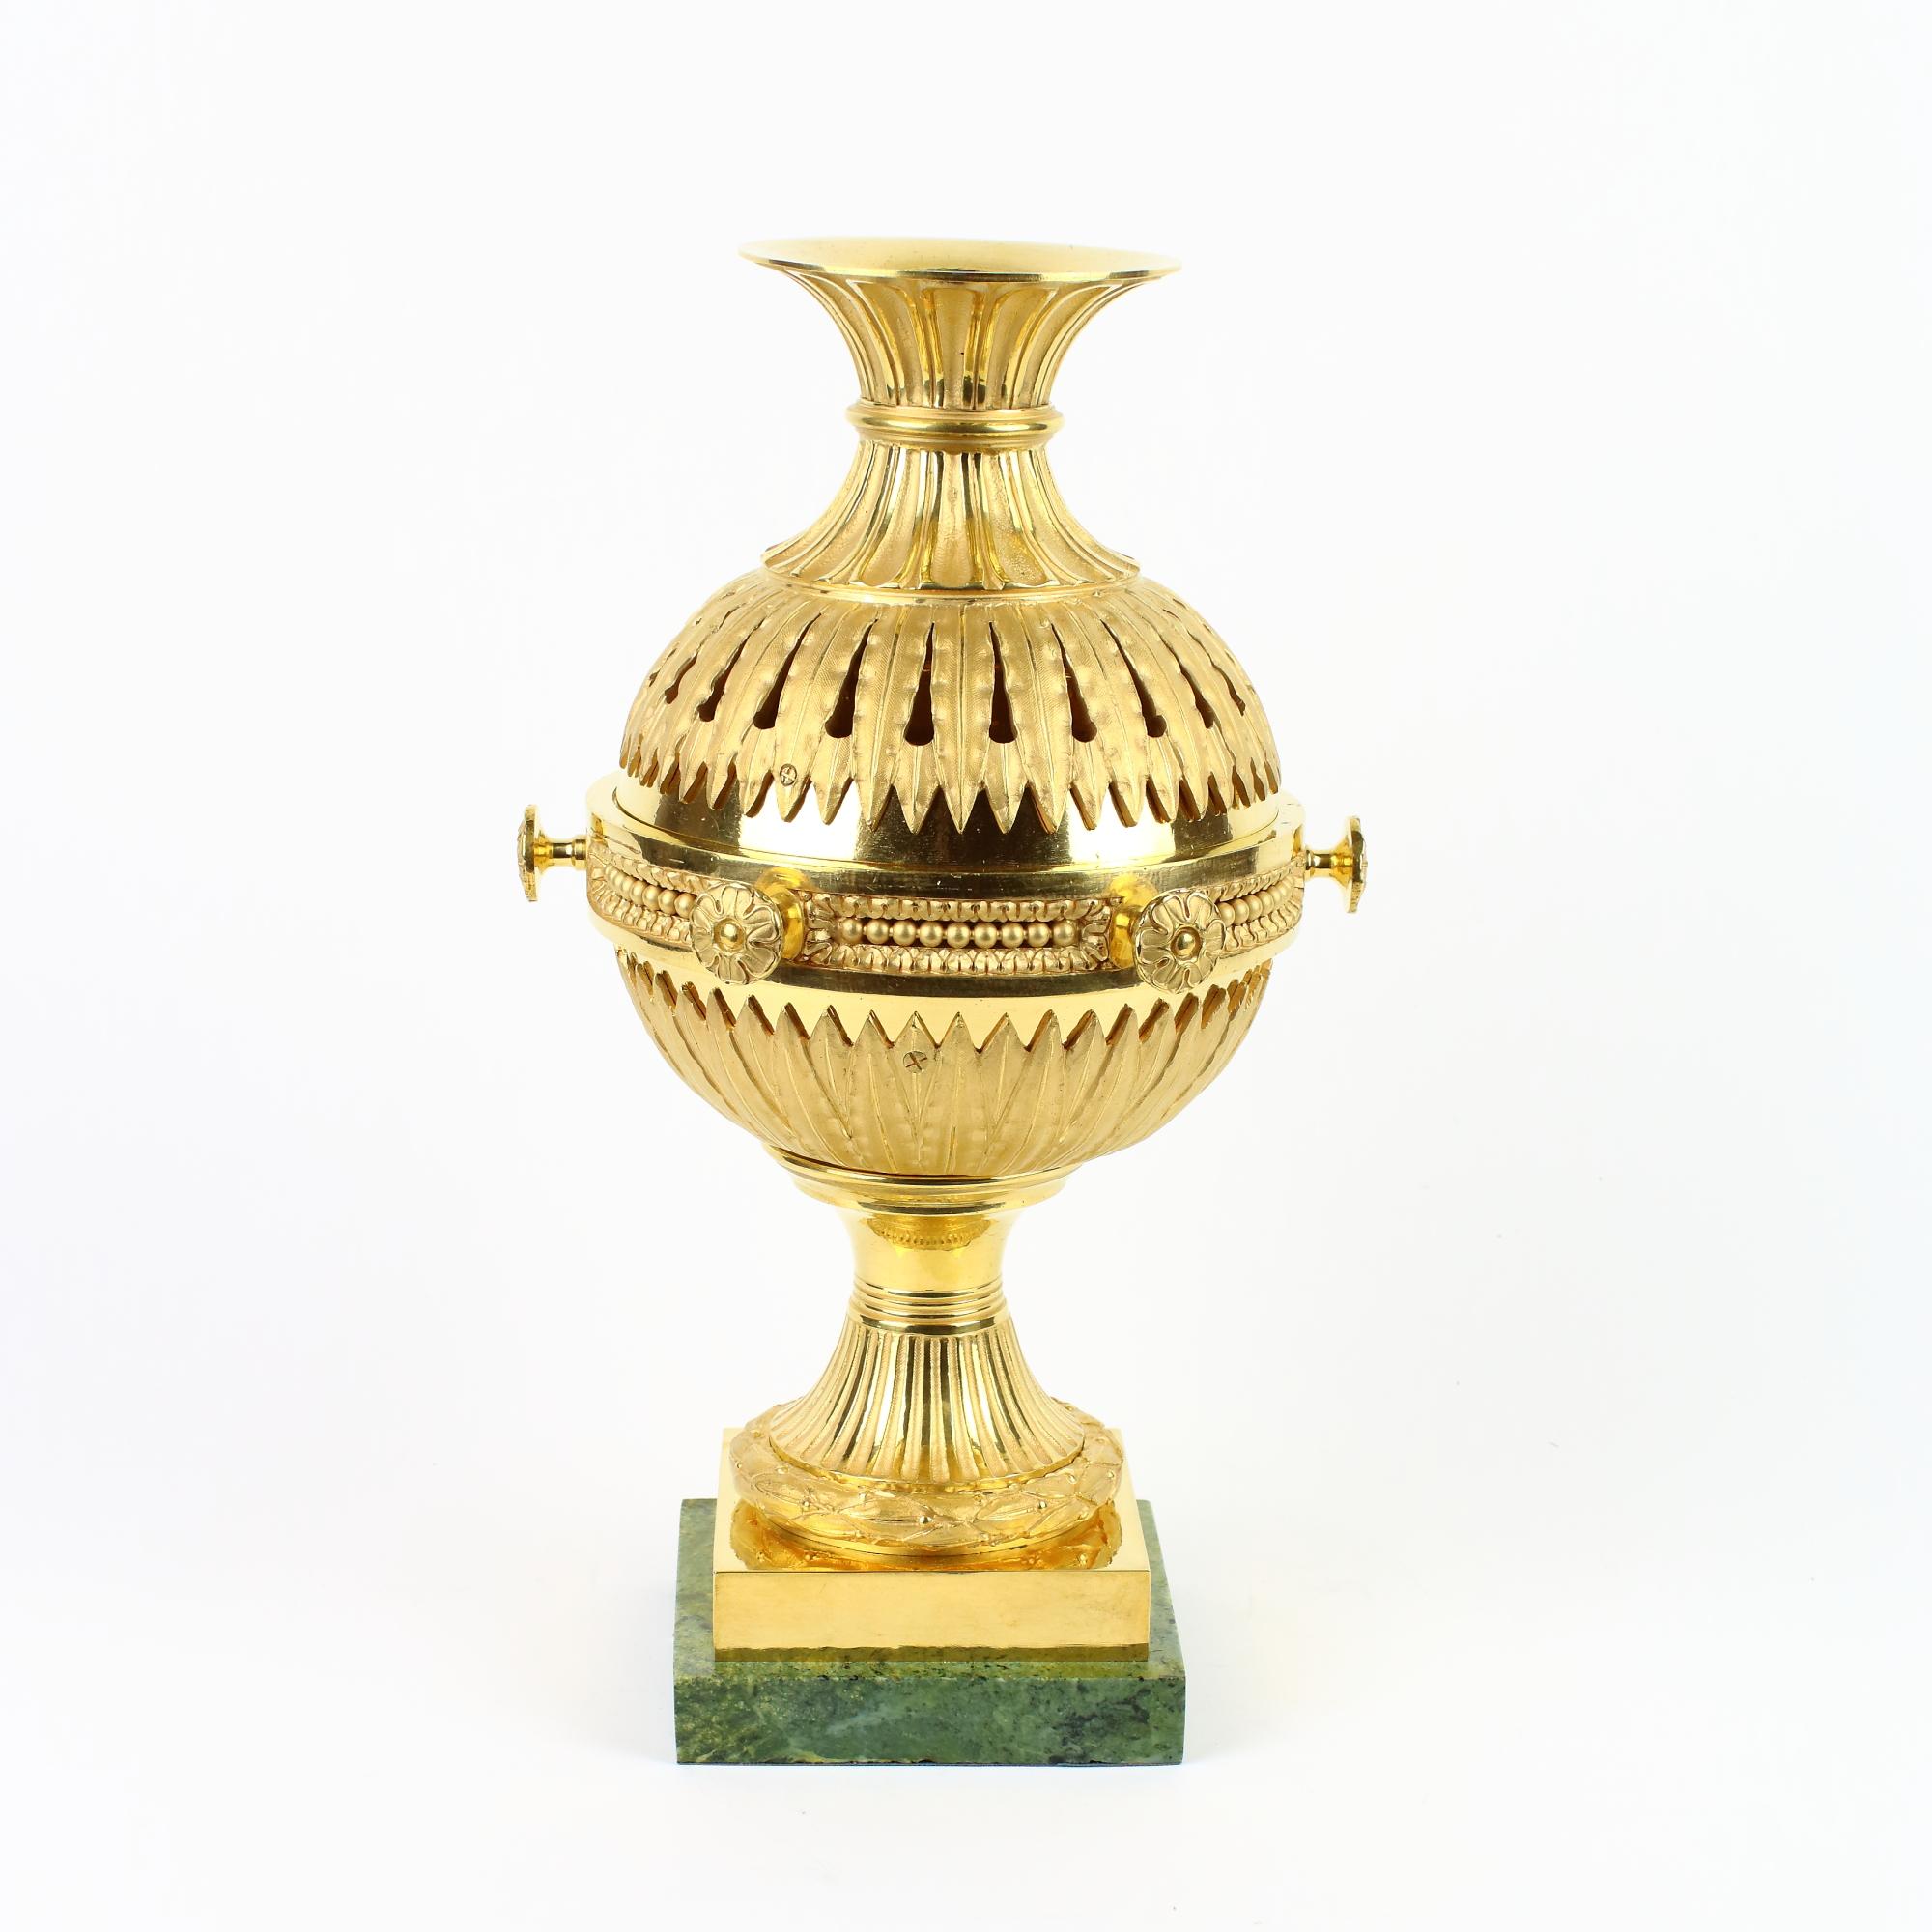 French Late 18th Century Louis XVI Gilt Bronze Incense Burner or Brule Parfum

A round and fluted foot surrounded by a laurel wreath standing on gilt bronze rectangular plinth which is mounted on a green marbled metal base. The round foot carries